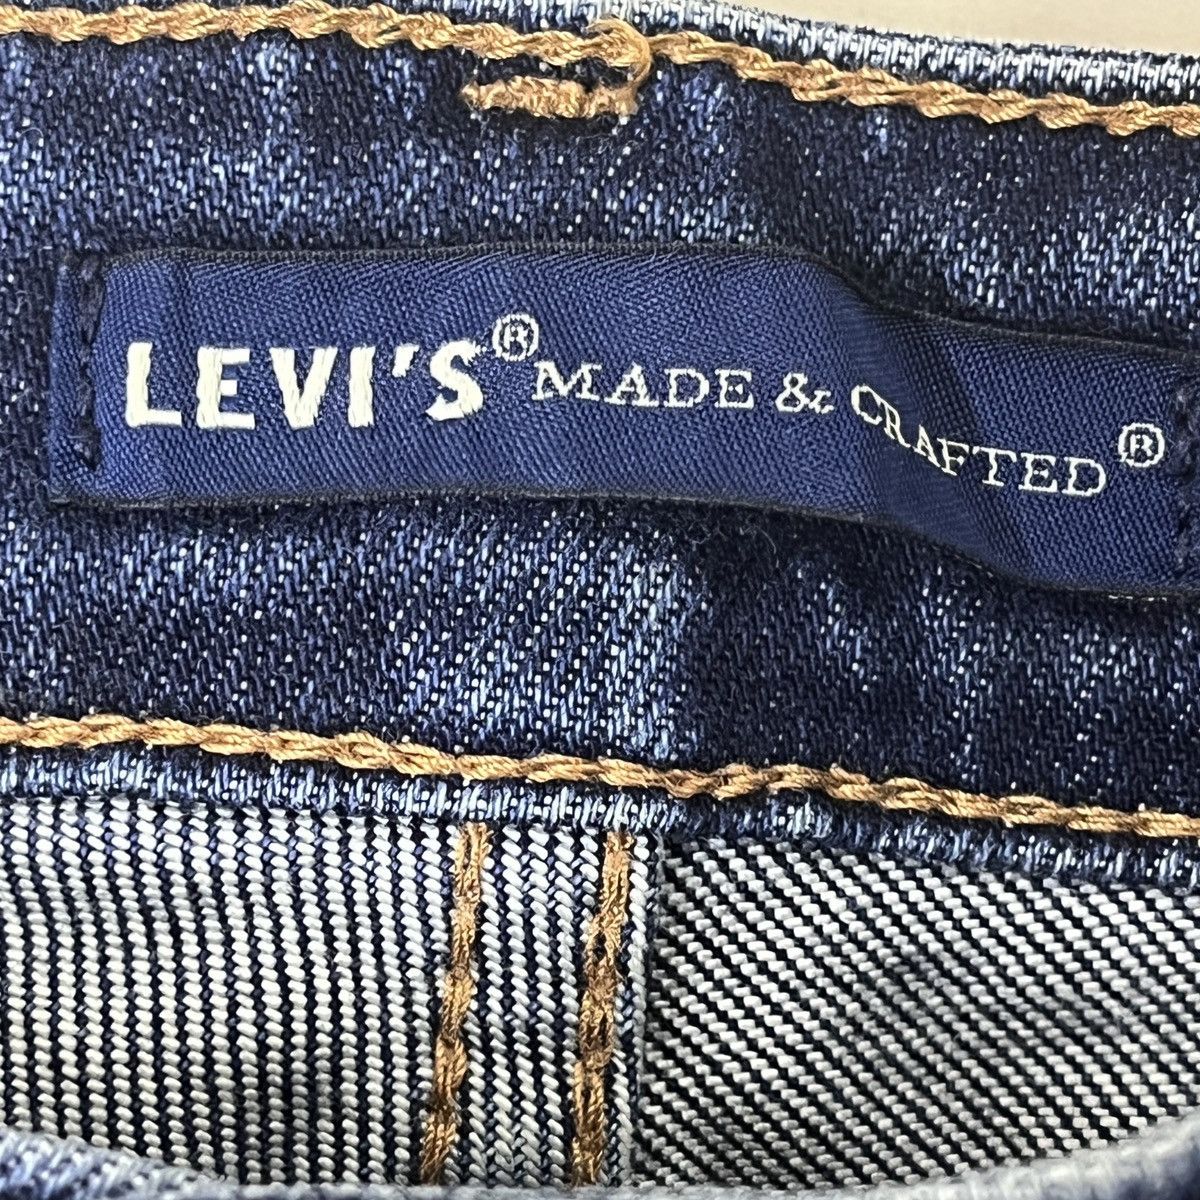 Levis Made & Crafted Blue Label Distressed Denim Jeans - 6